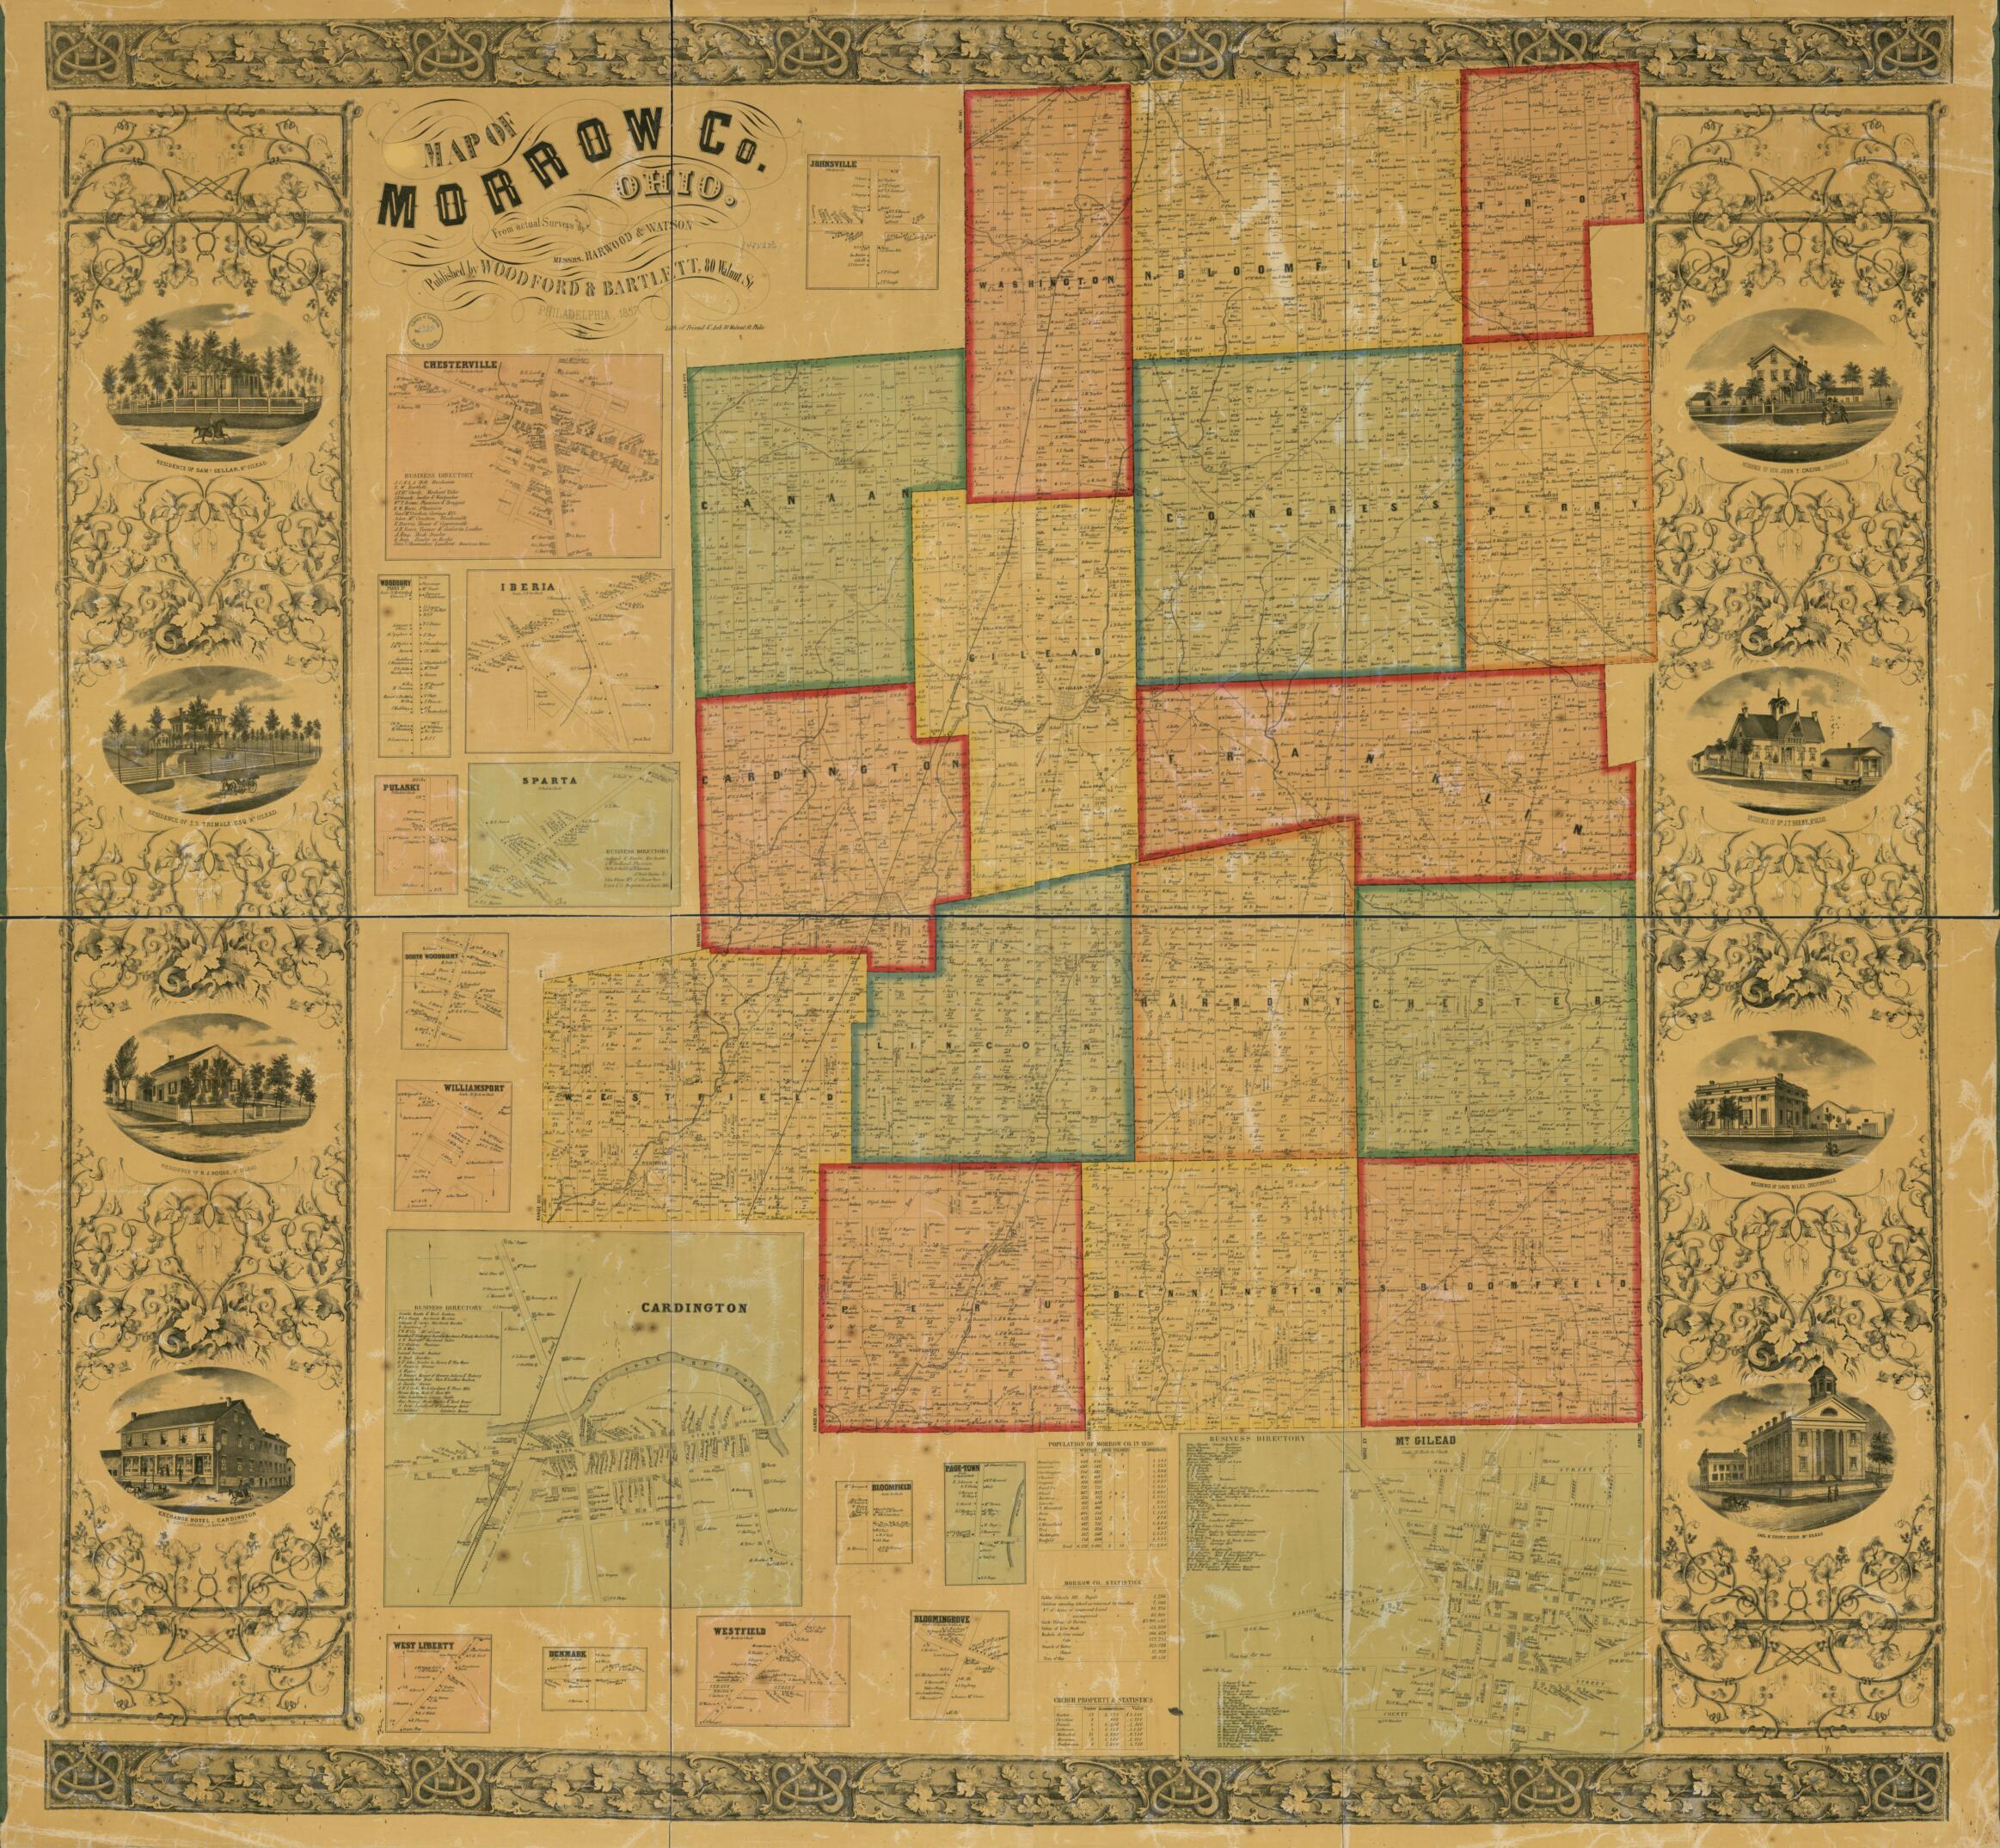 This old map of Map of Morrow Co., Ohio from 1857 was created by  Friend &amp; Aub,  Harwood &amp; Watson,  Woodford &amp; Bartlett in 1857